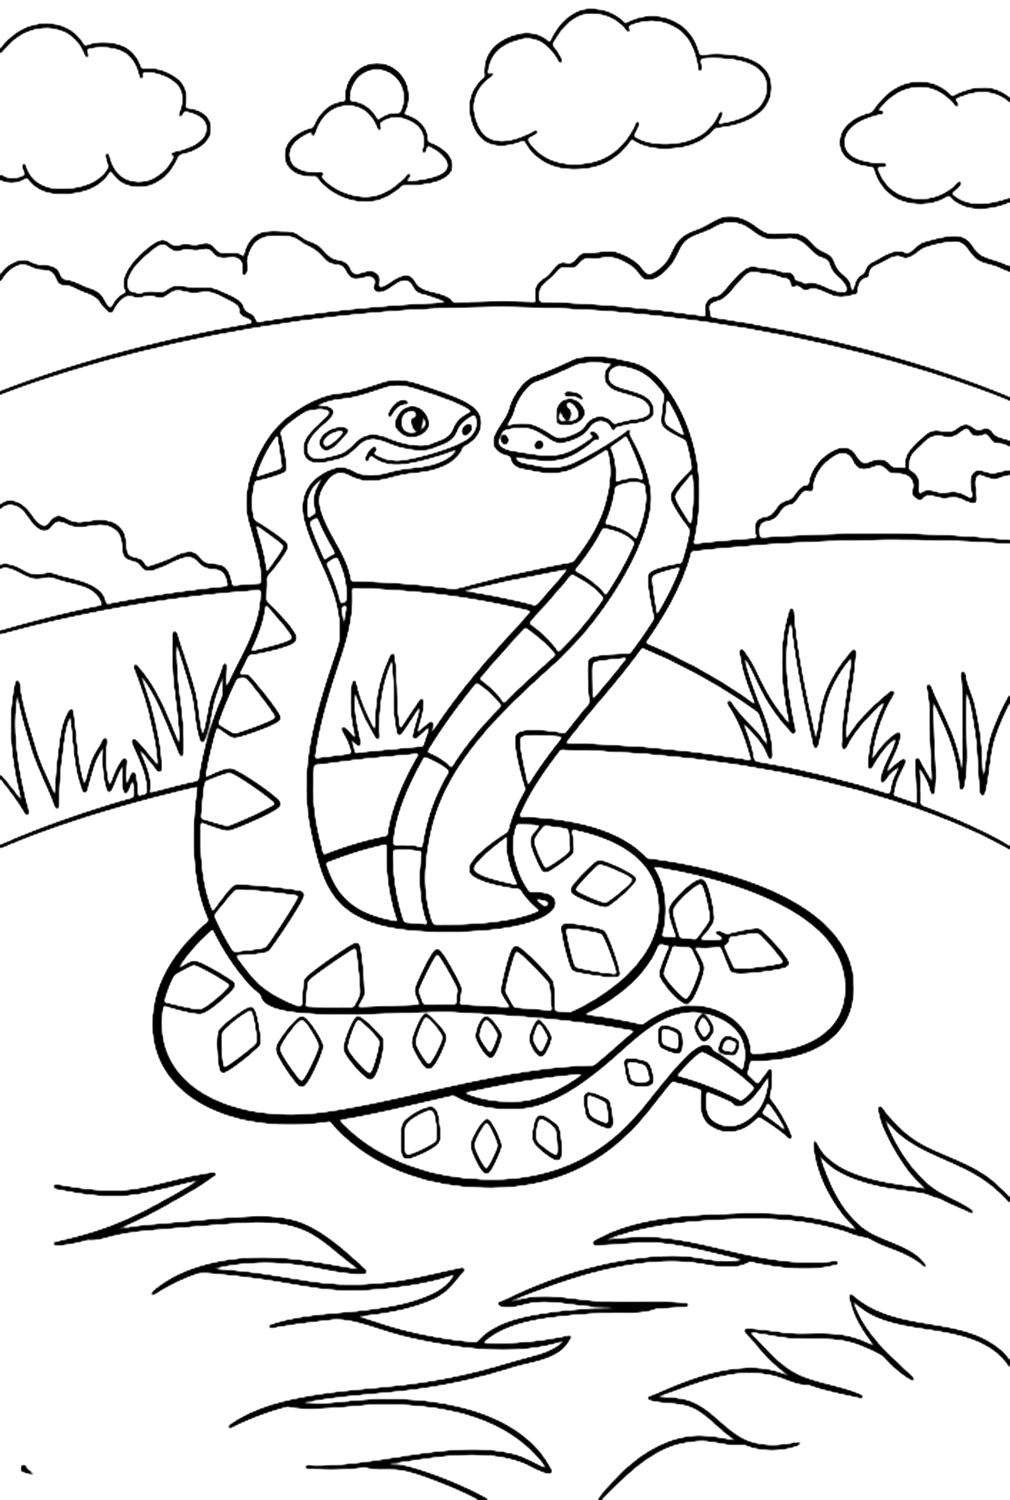 Python Picture To Color from Python